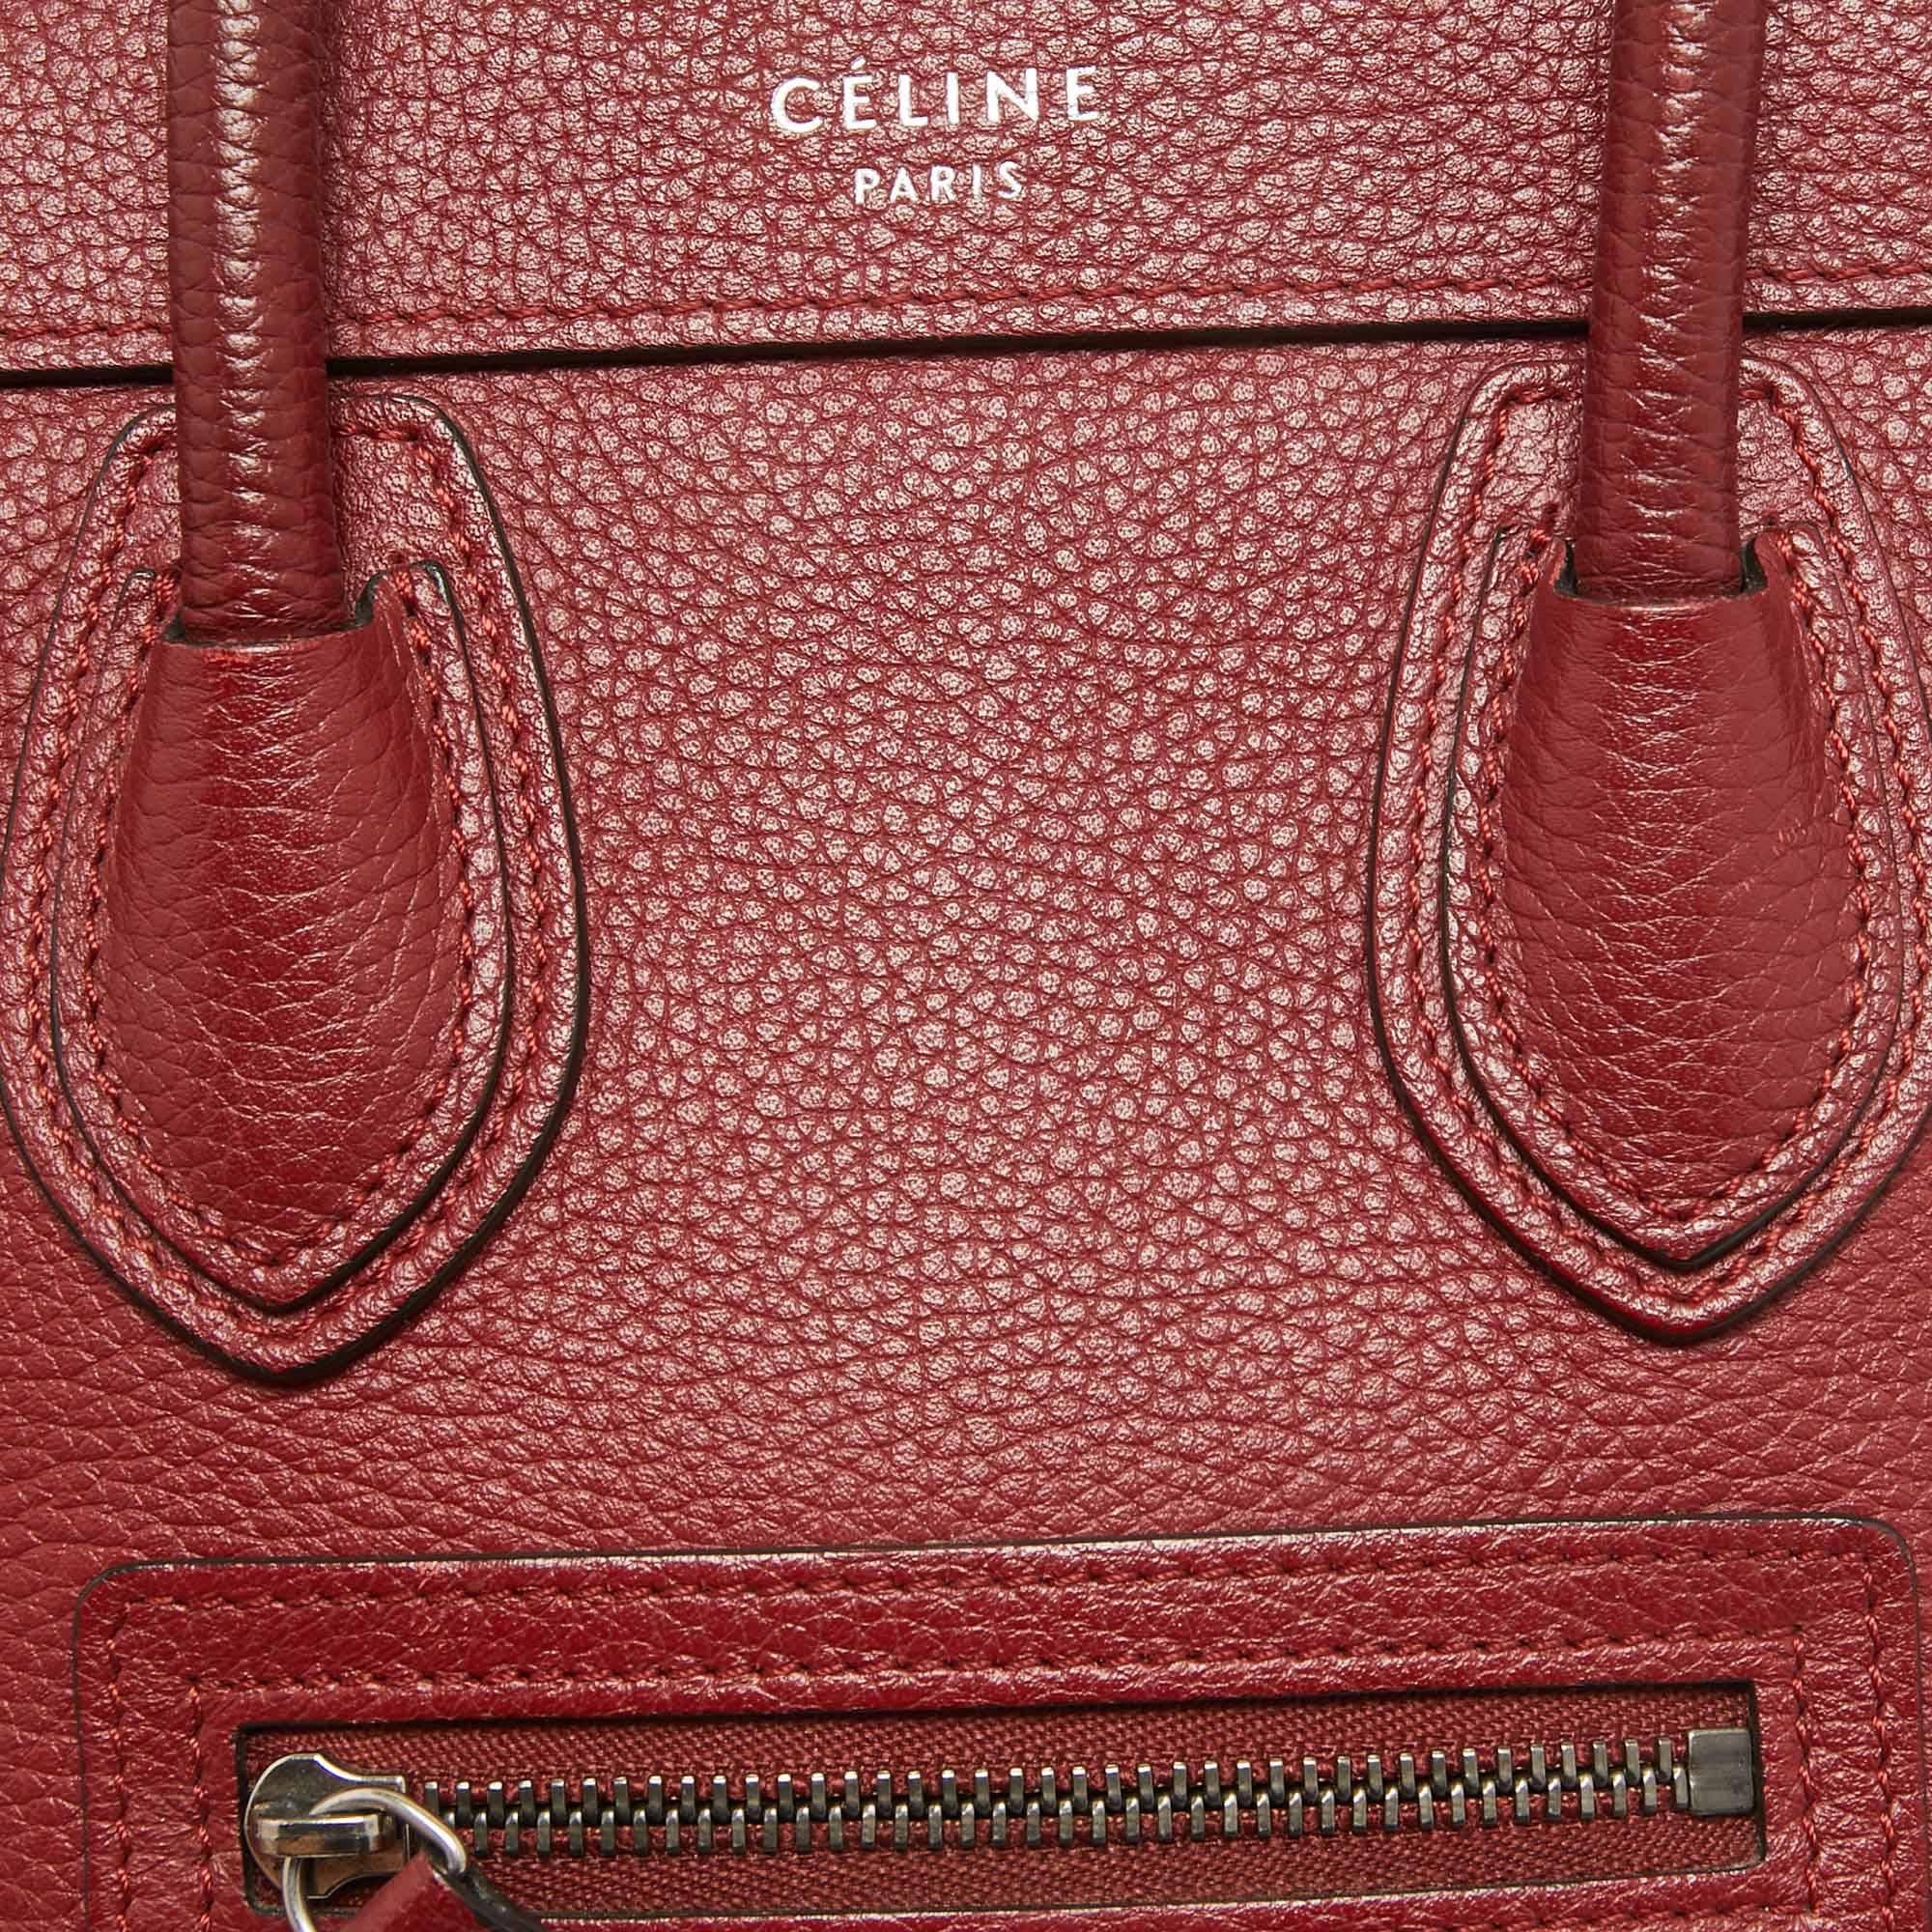 Céline Red Leather Nano Luggage Tote For Sale 3